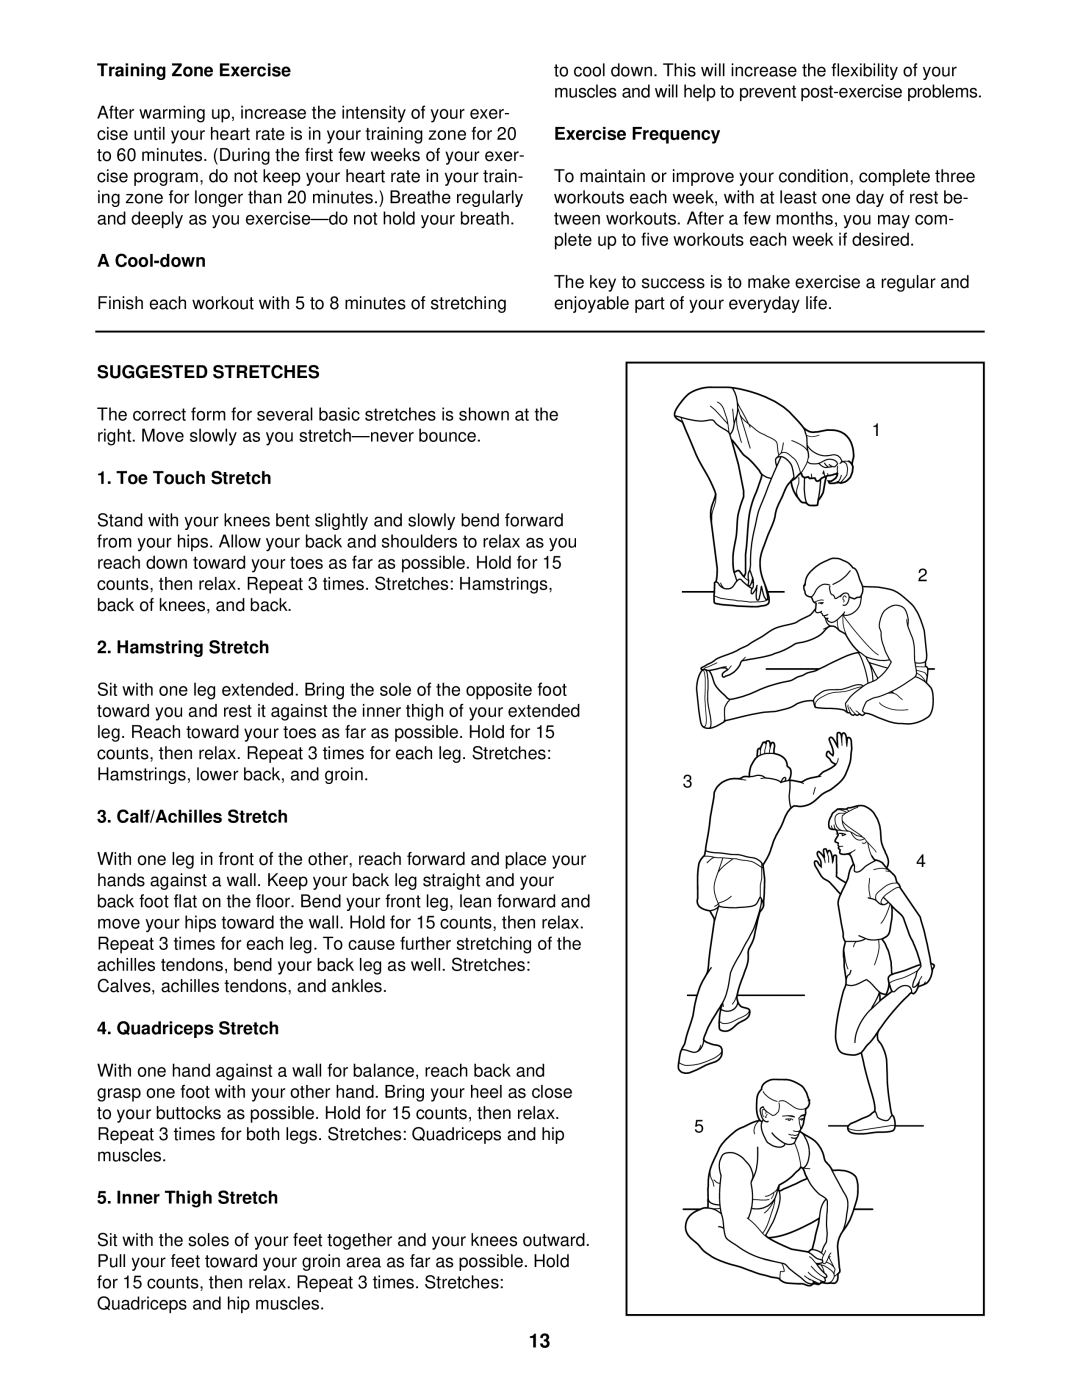 ProForm 831.297460 user manual Suggested Stretches 